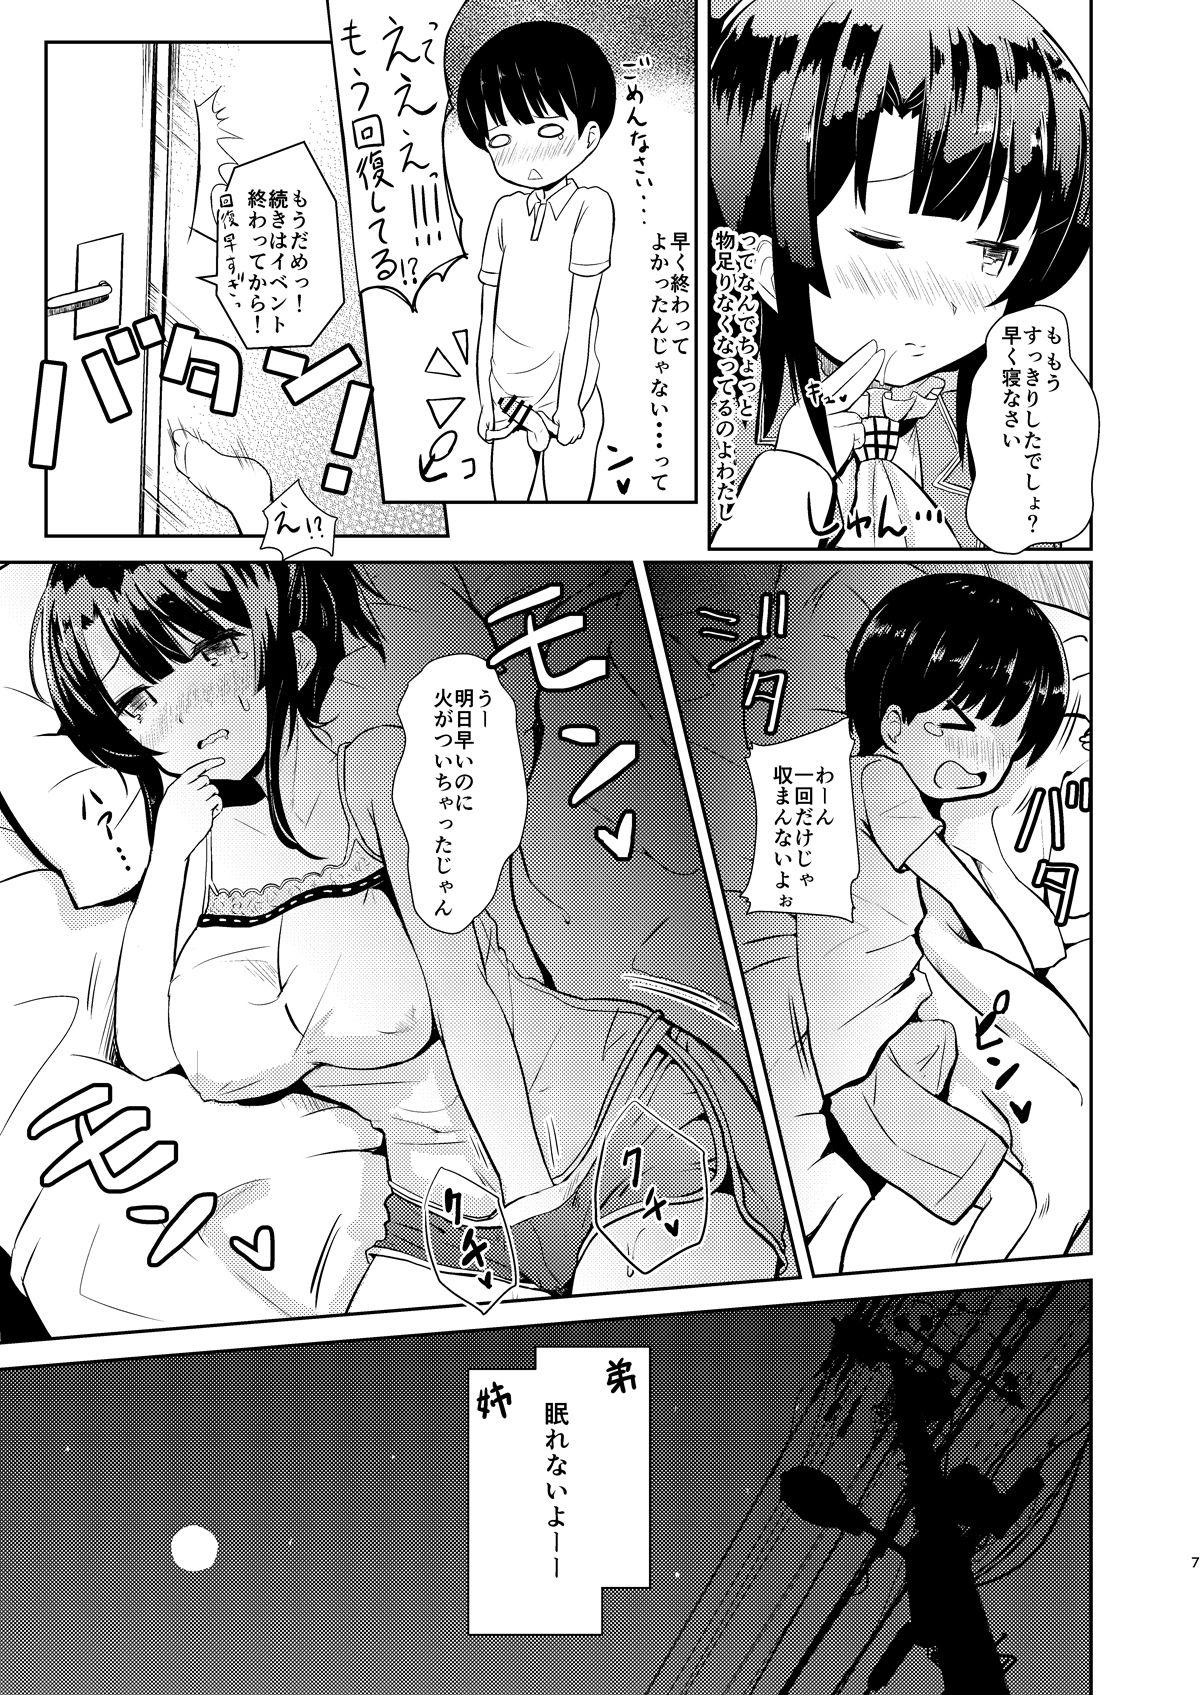 Music Takao-ppoi Ane - Kantai collection Picked Up - Page 6